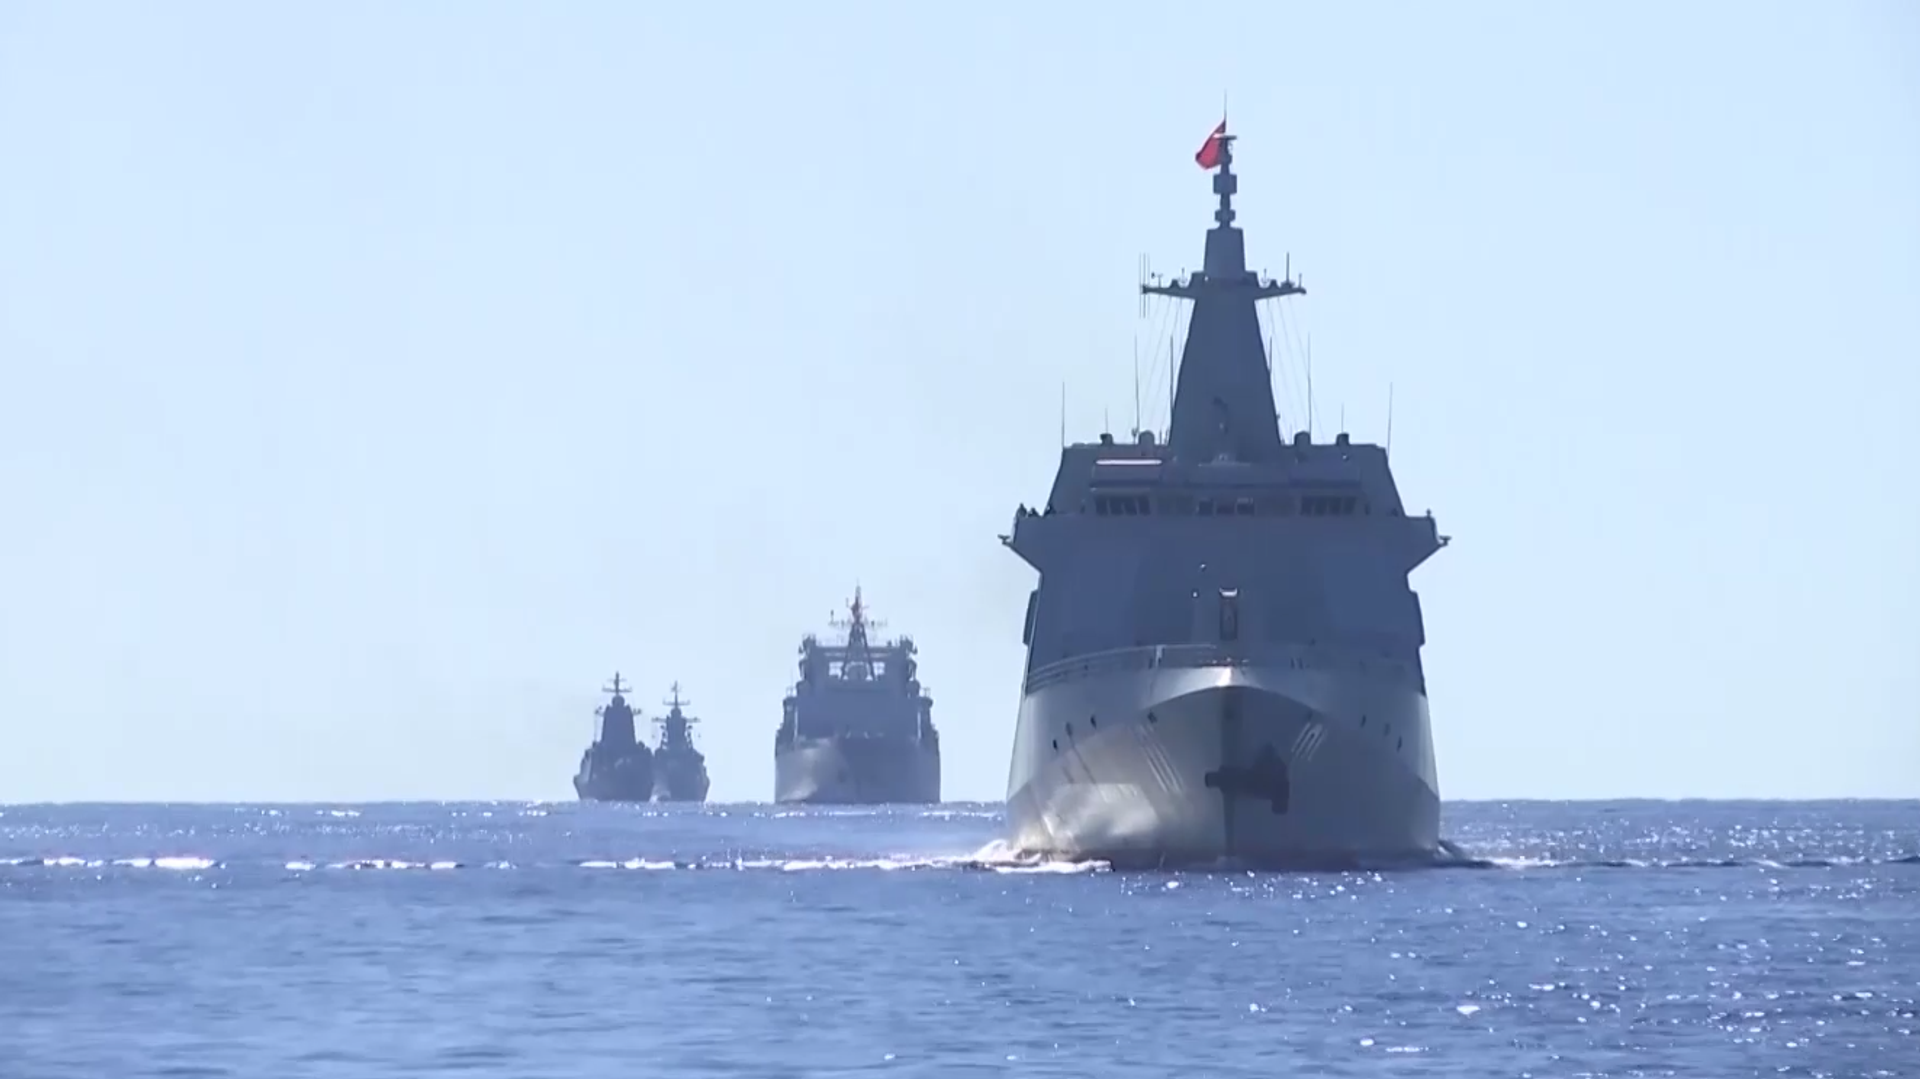 Chinese warships arrive for a joint patrol and drills with their Russian counterparts in the Pacific Ocean and the Sea of Okhotsk. Thursday, September 15, 2022. - Sputnik International, 1920, 15.09.2022